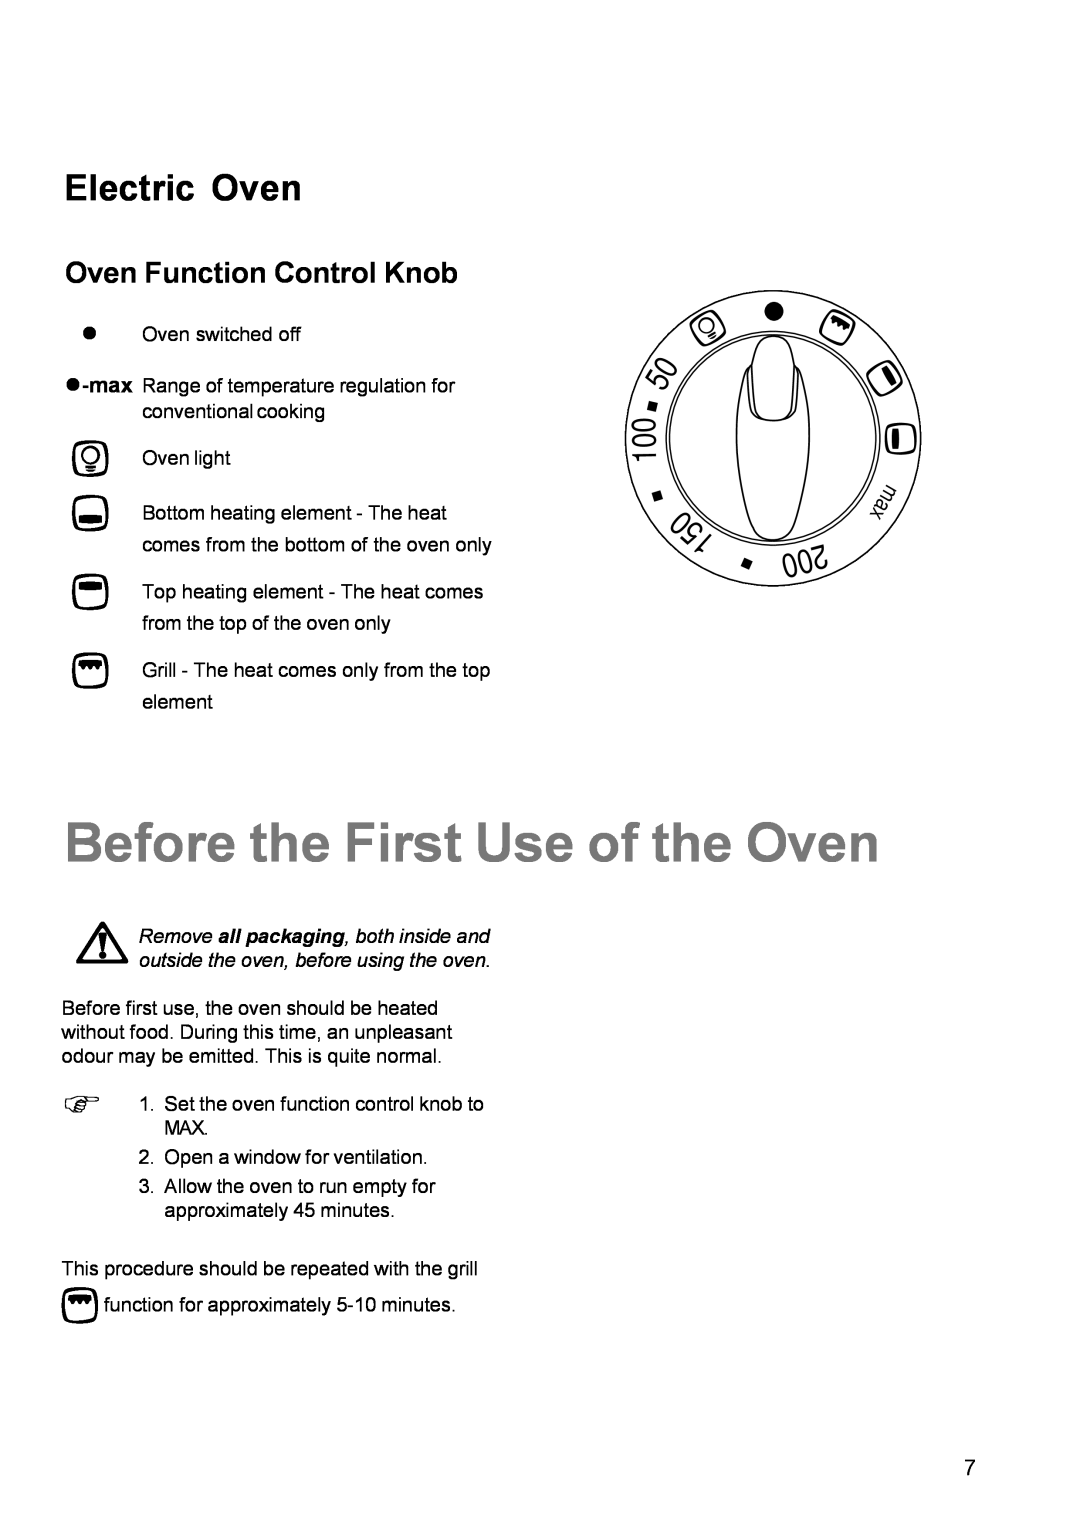 Electrolux EK 5731 manual Before the First Use of the Oven, Oven Function Control Knob, Electric Oven 